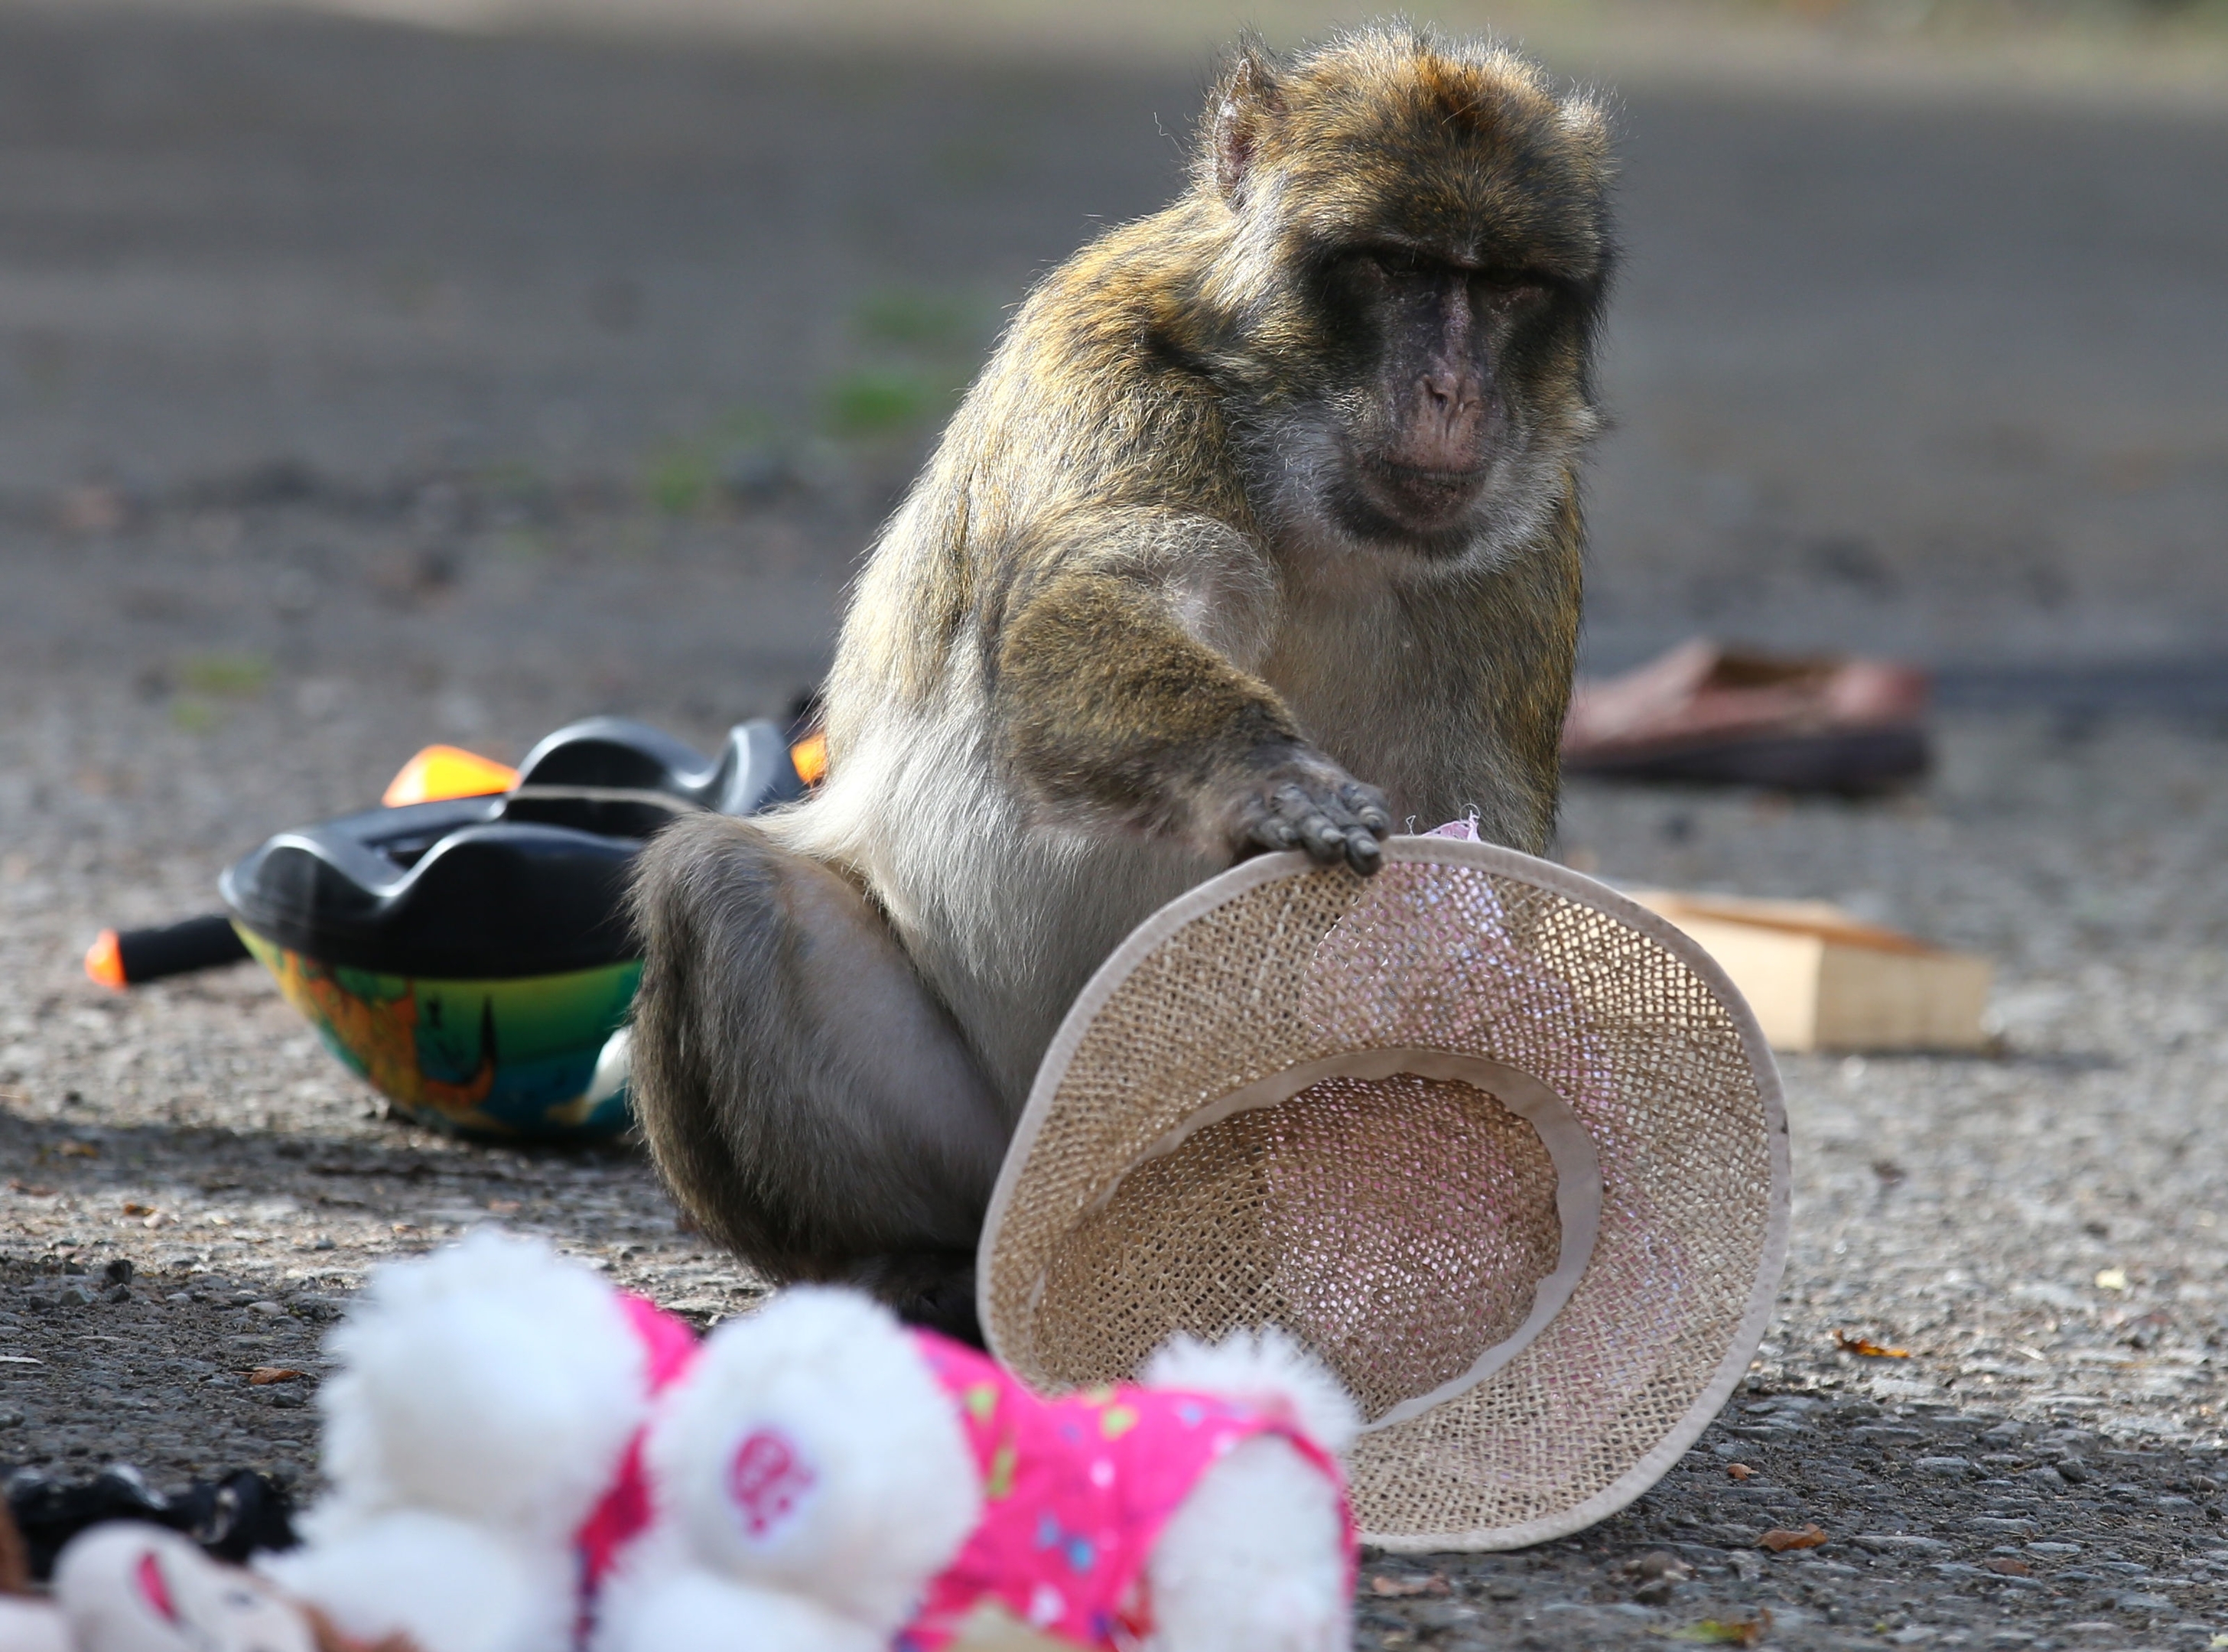 The real tragedy here is that the monkey didn't wear the hat